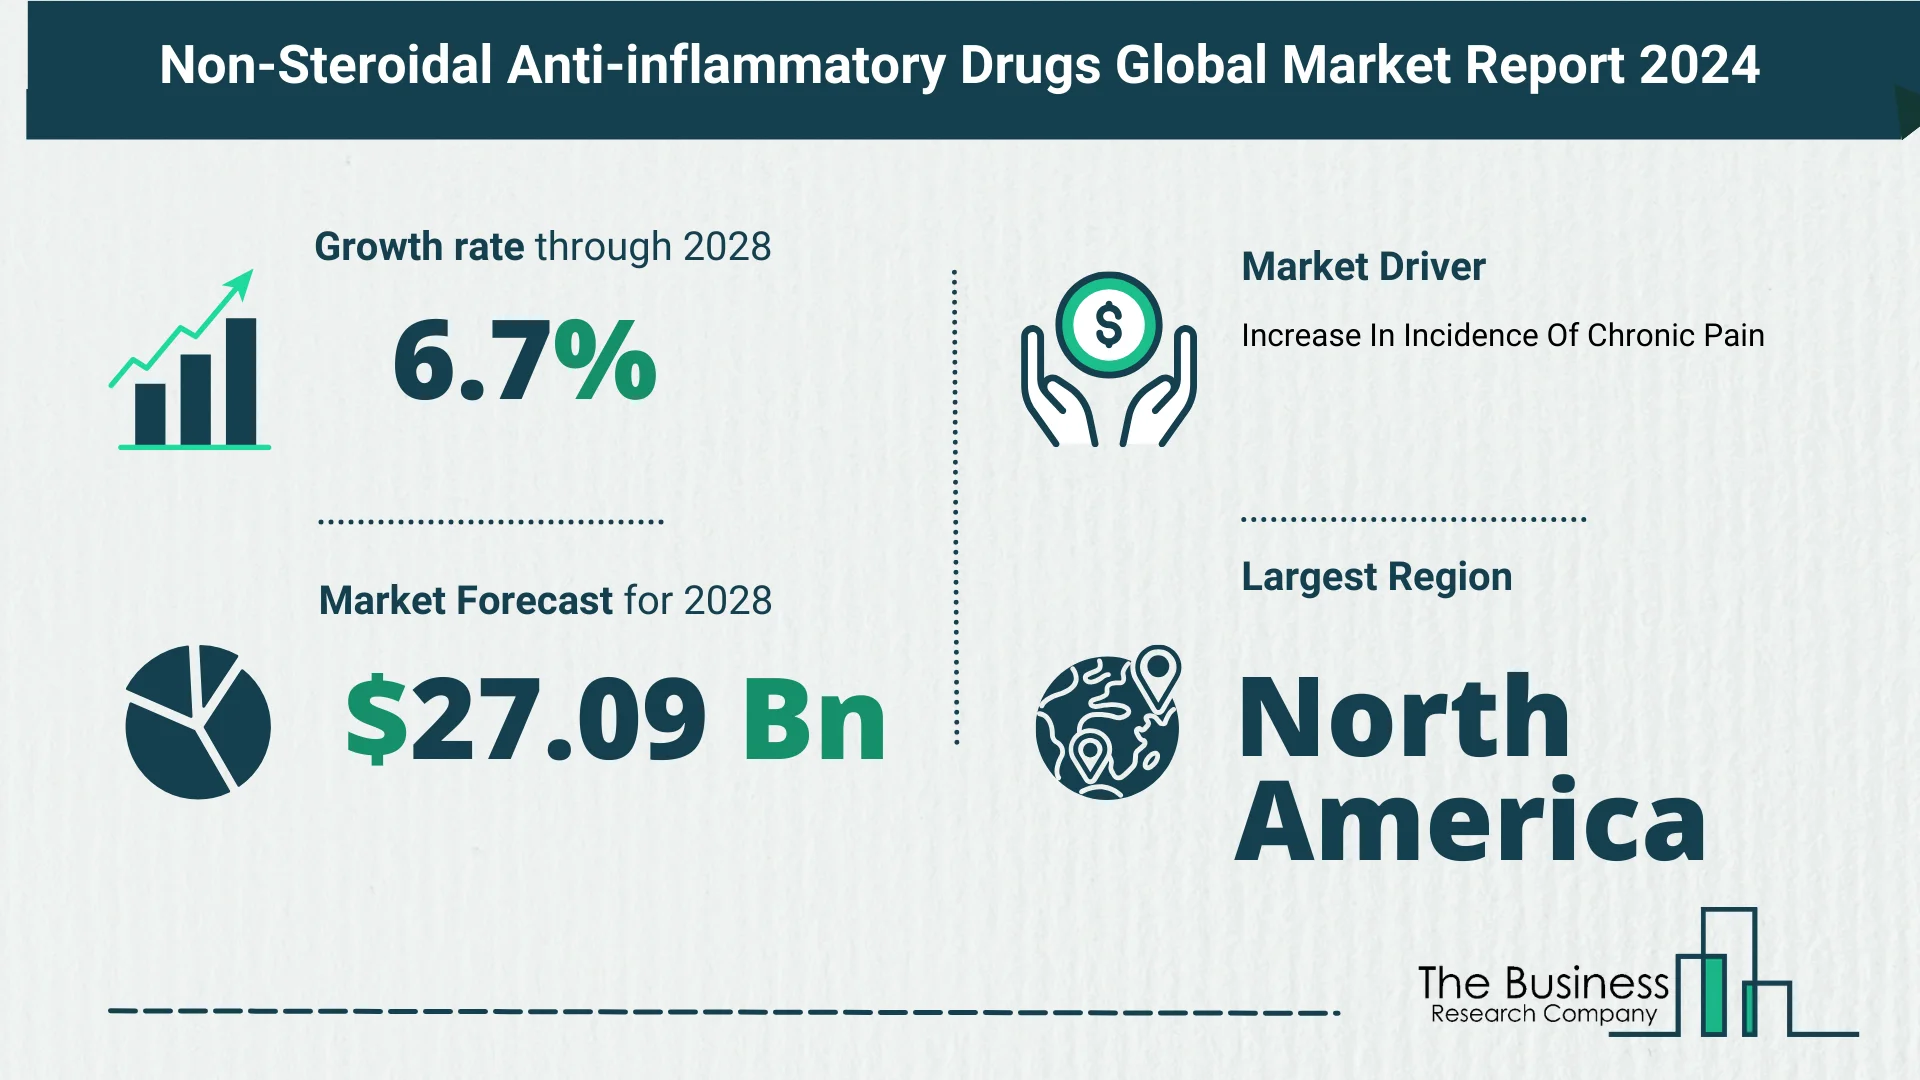 5 Key Insights On The Non-Steroidal Anti-inflammatory Drugs Market 2024